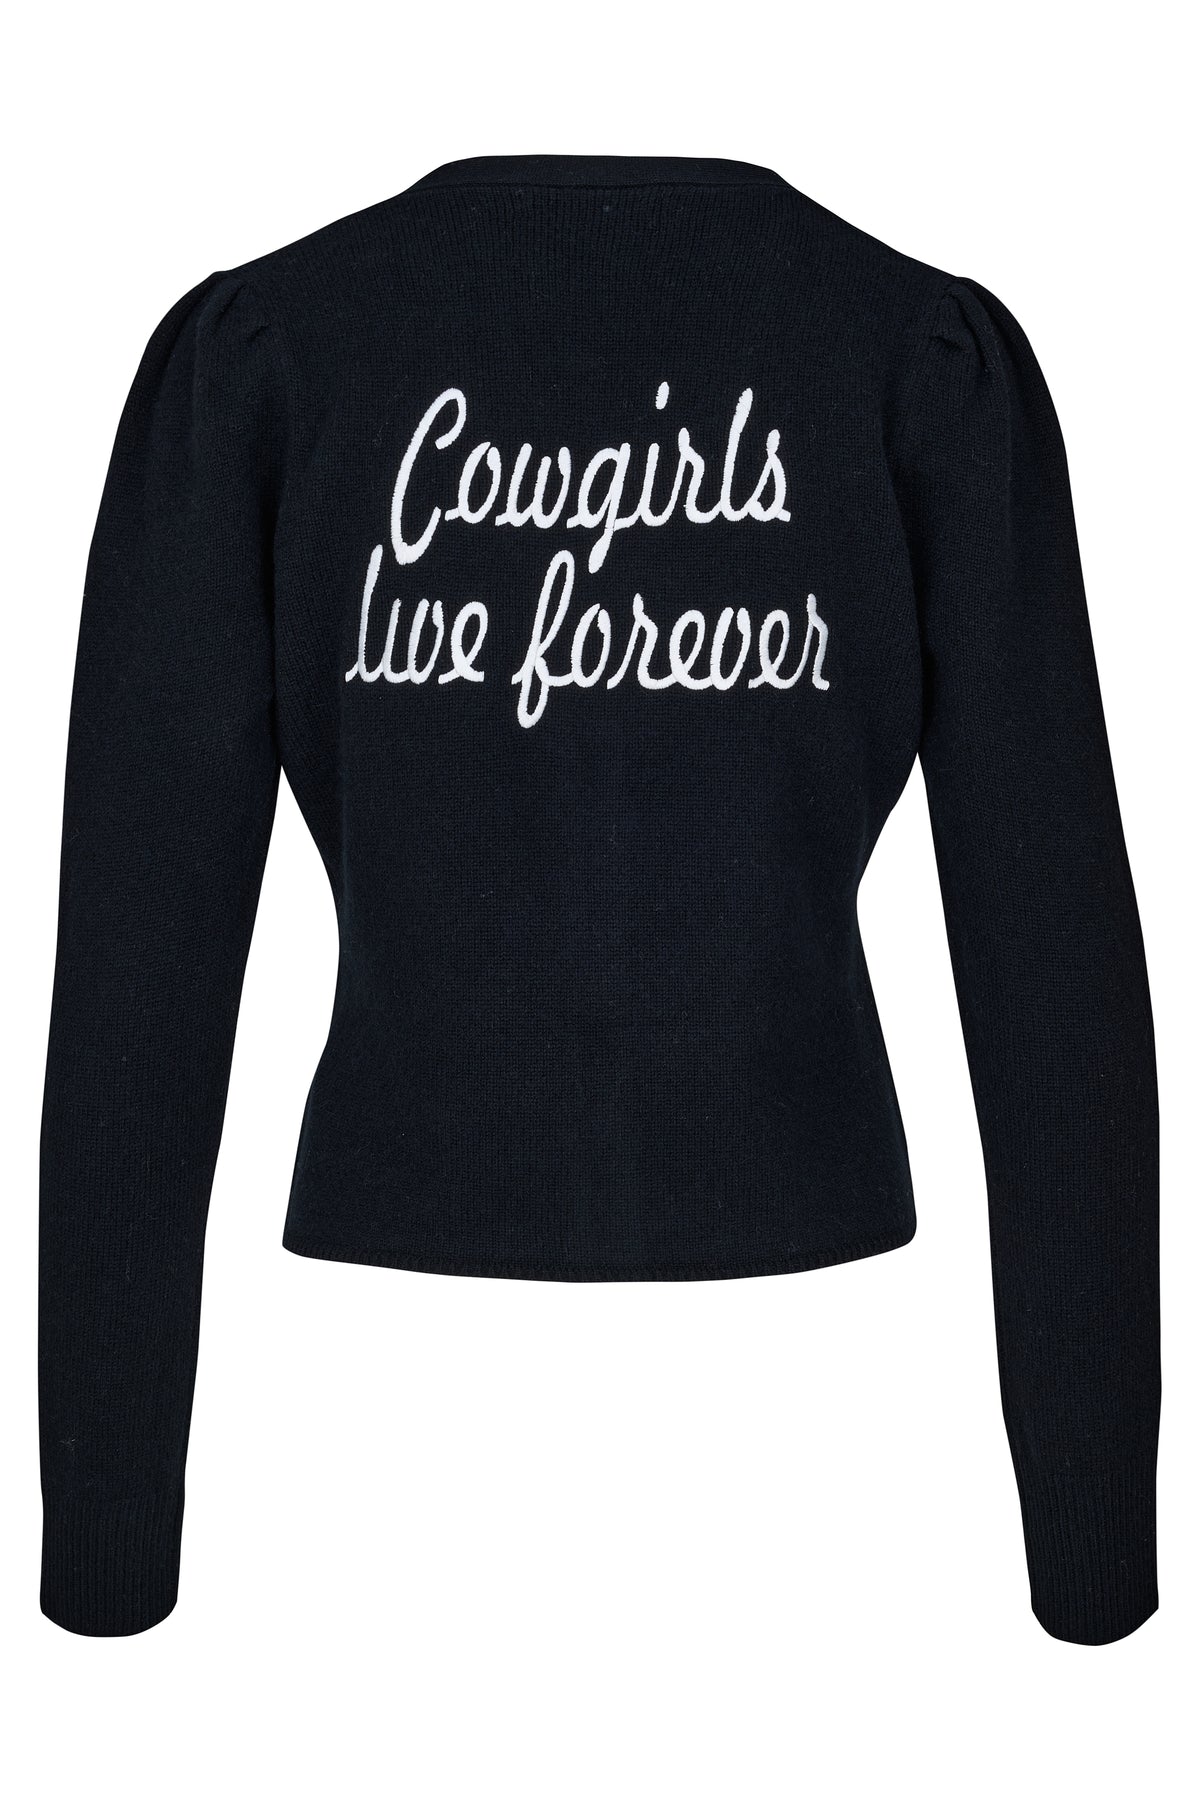 Cowgirls Live Forever Cardigan Black